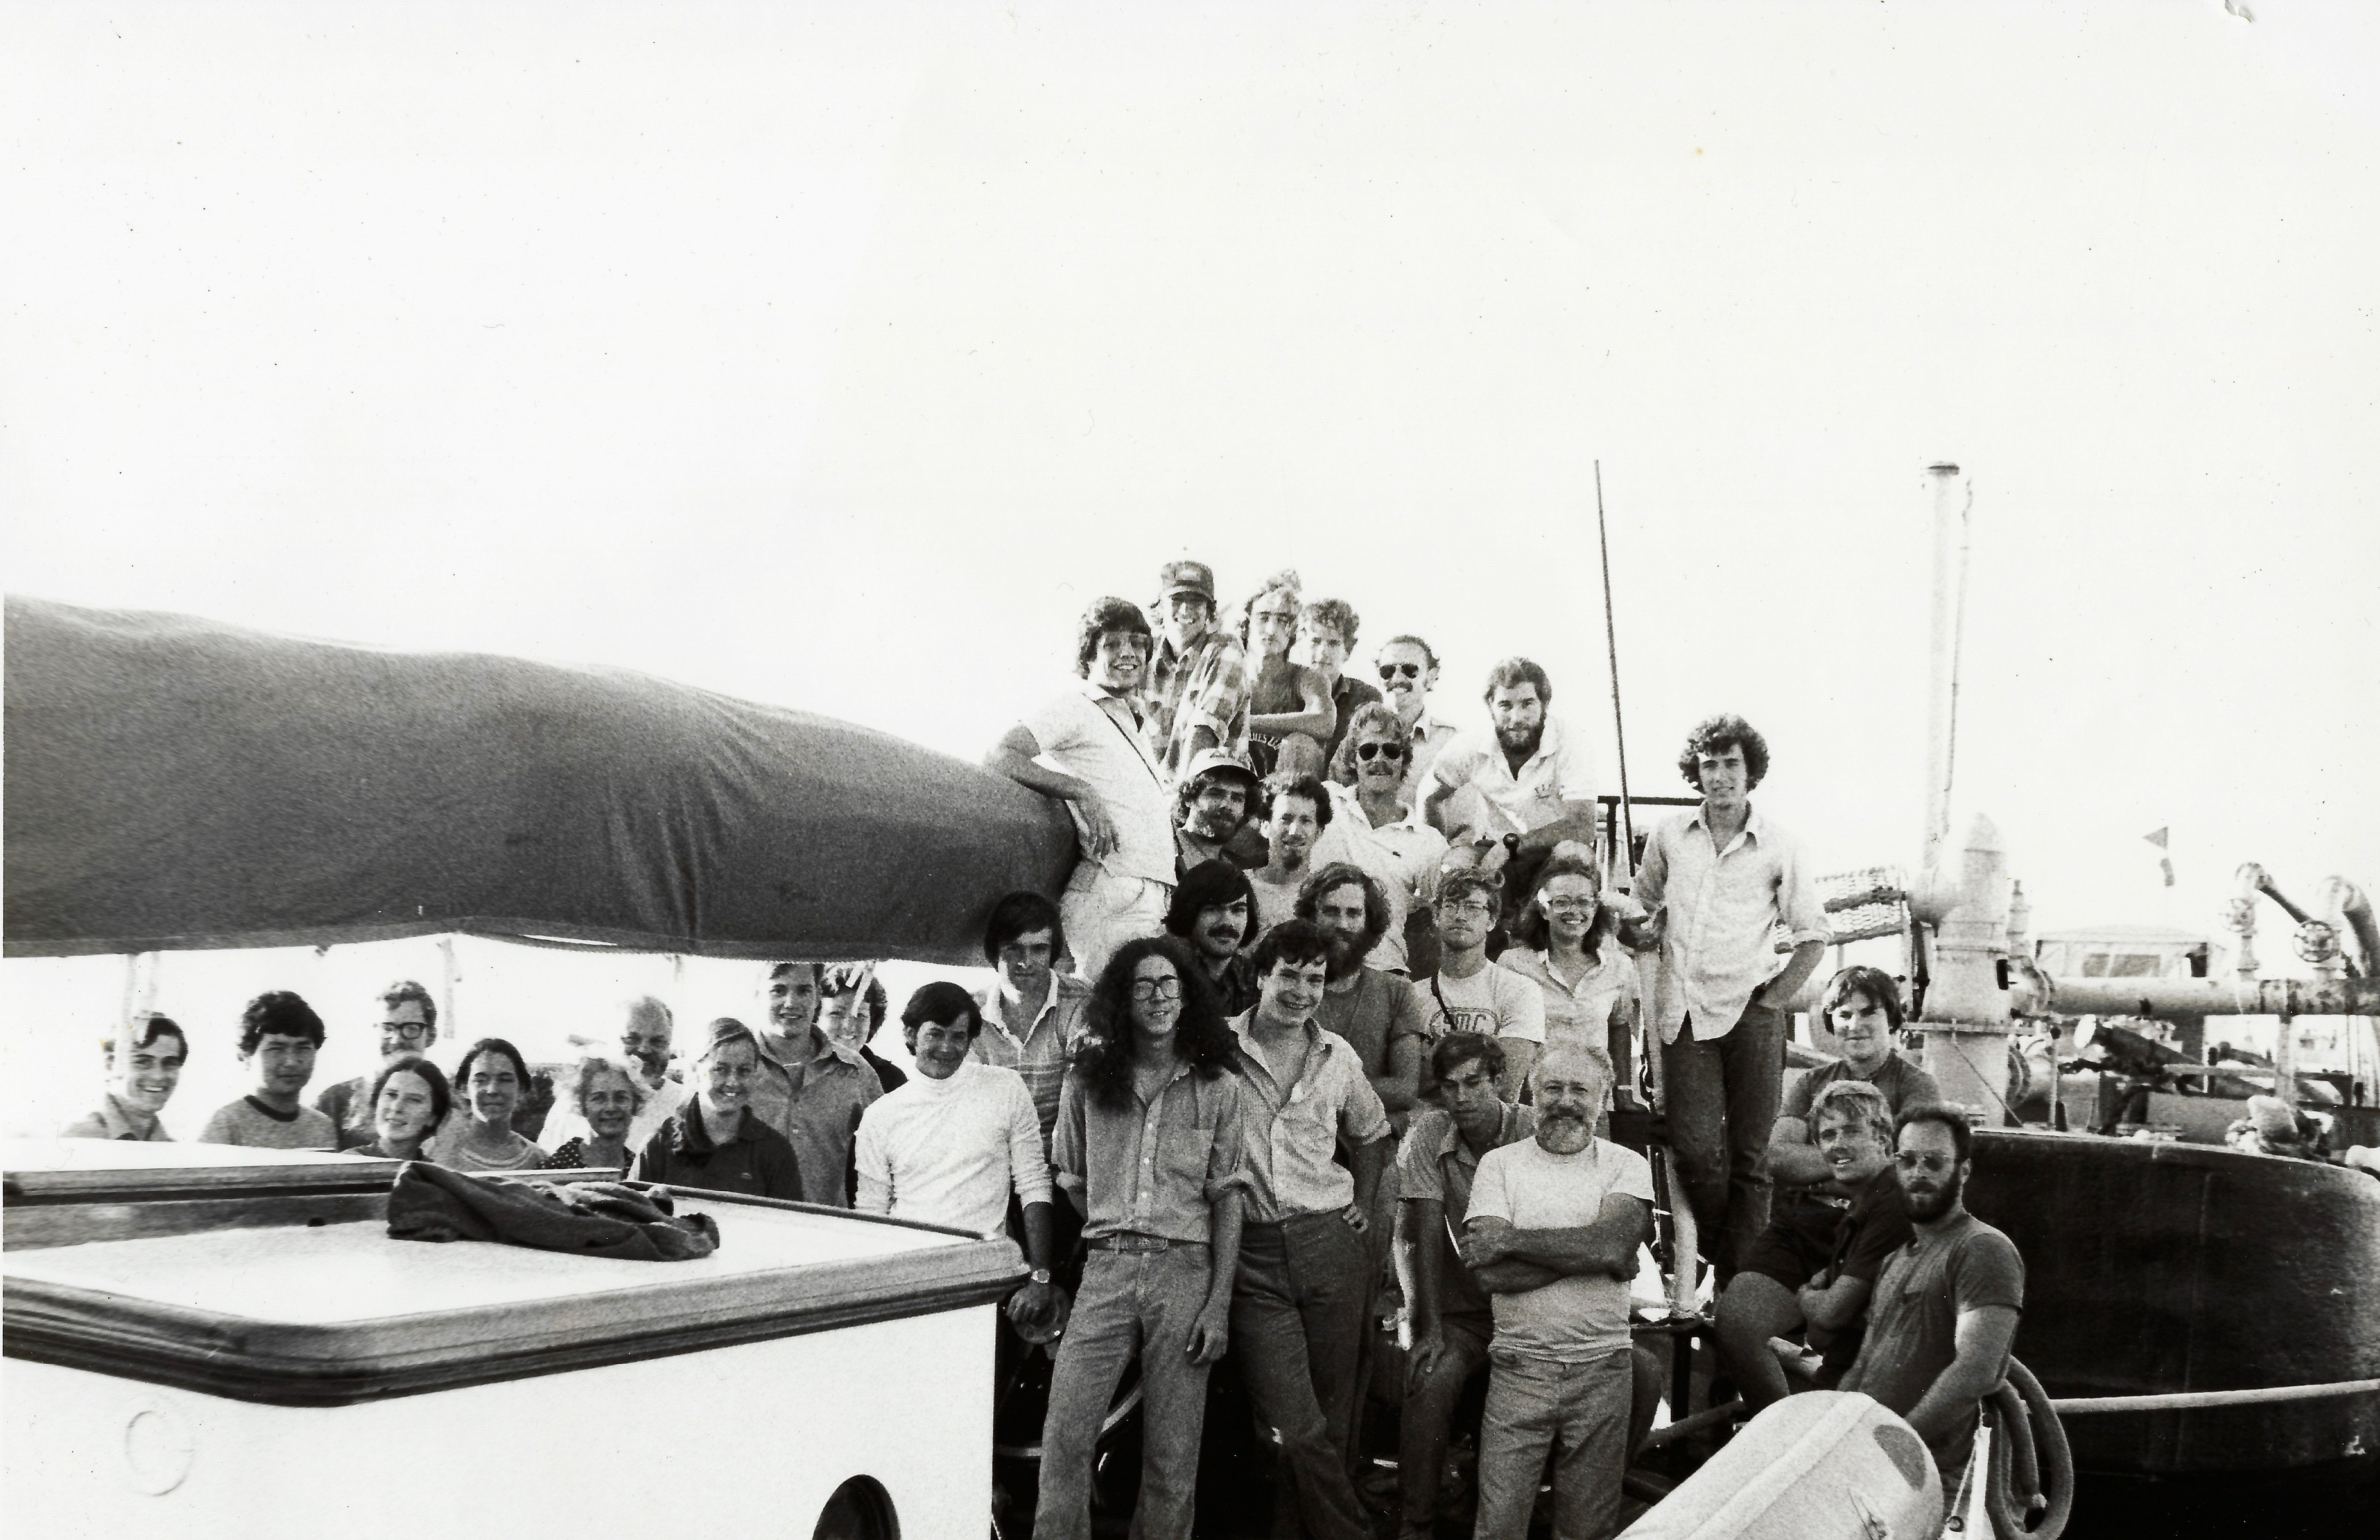 A black and white photo of a group of men and women on a boat 